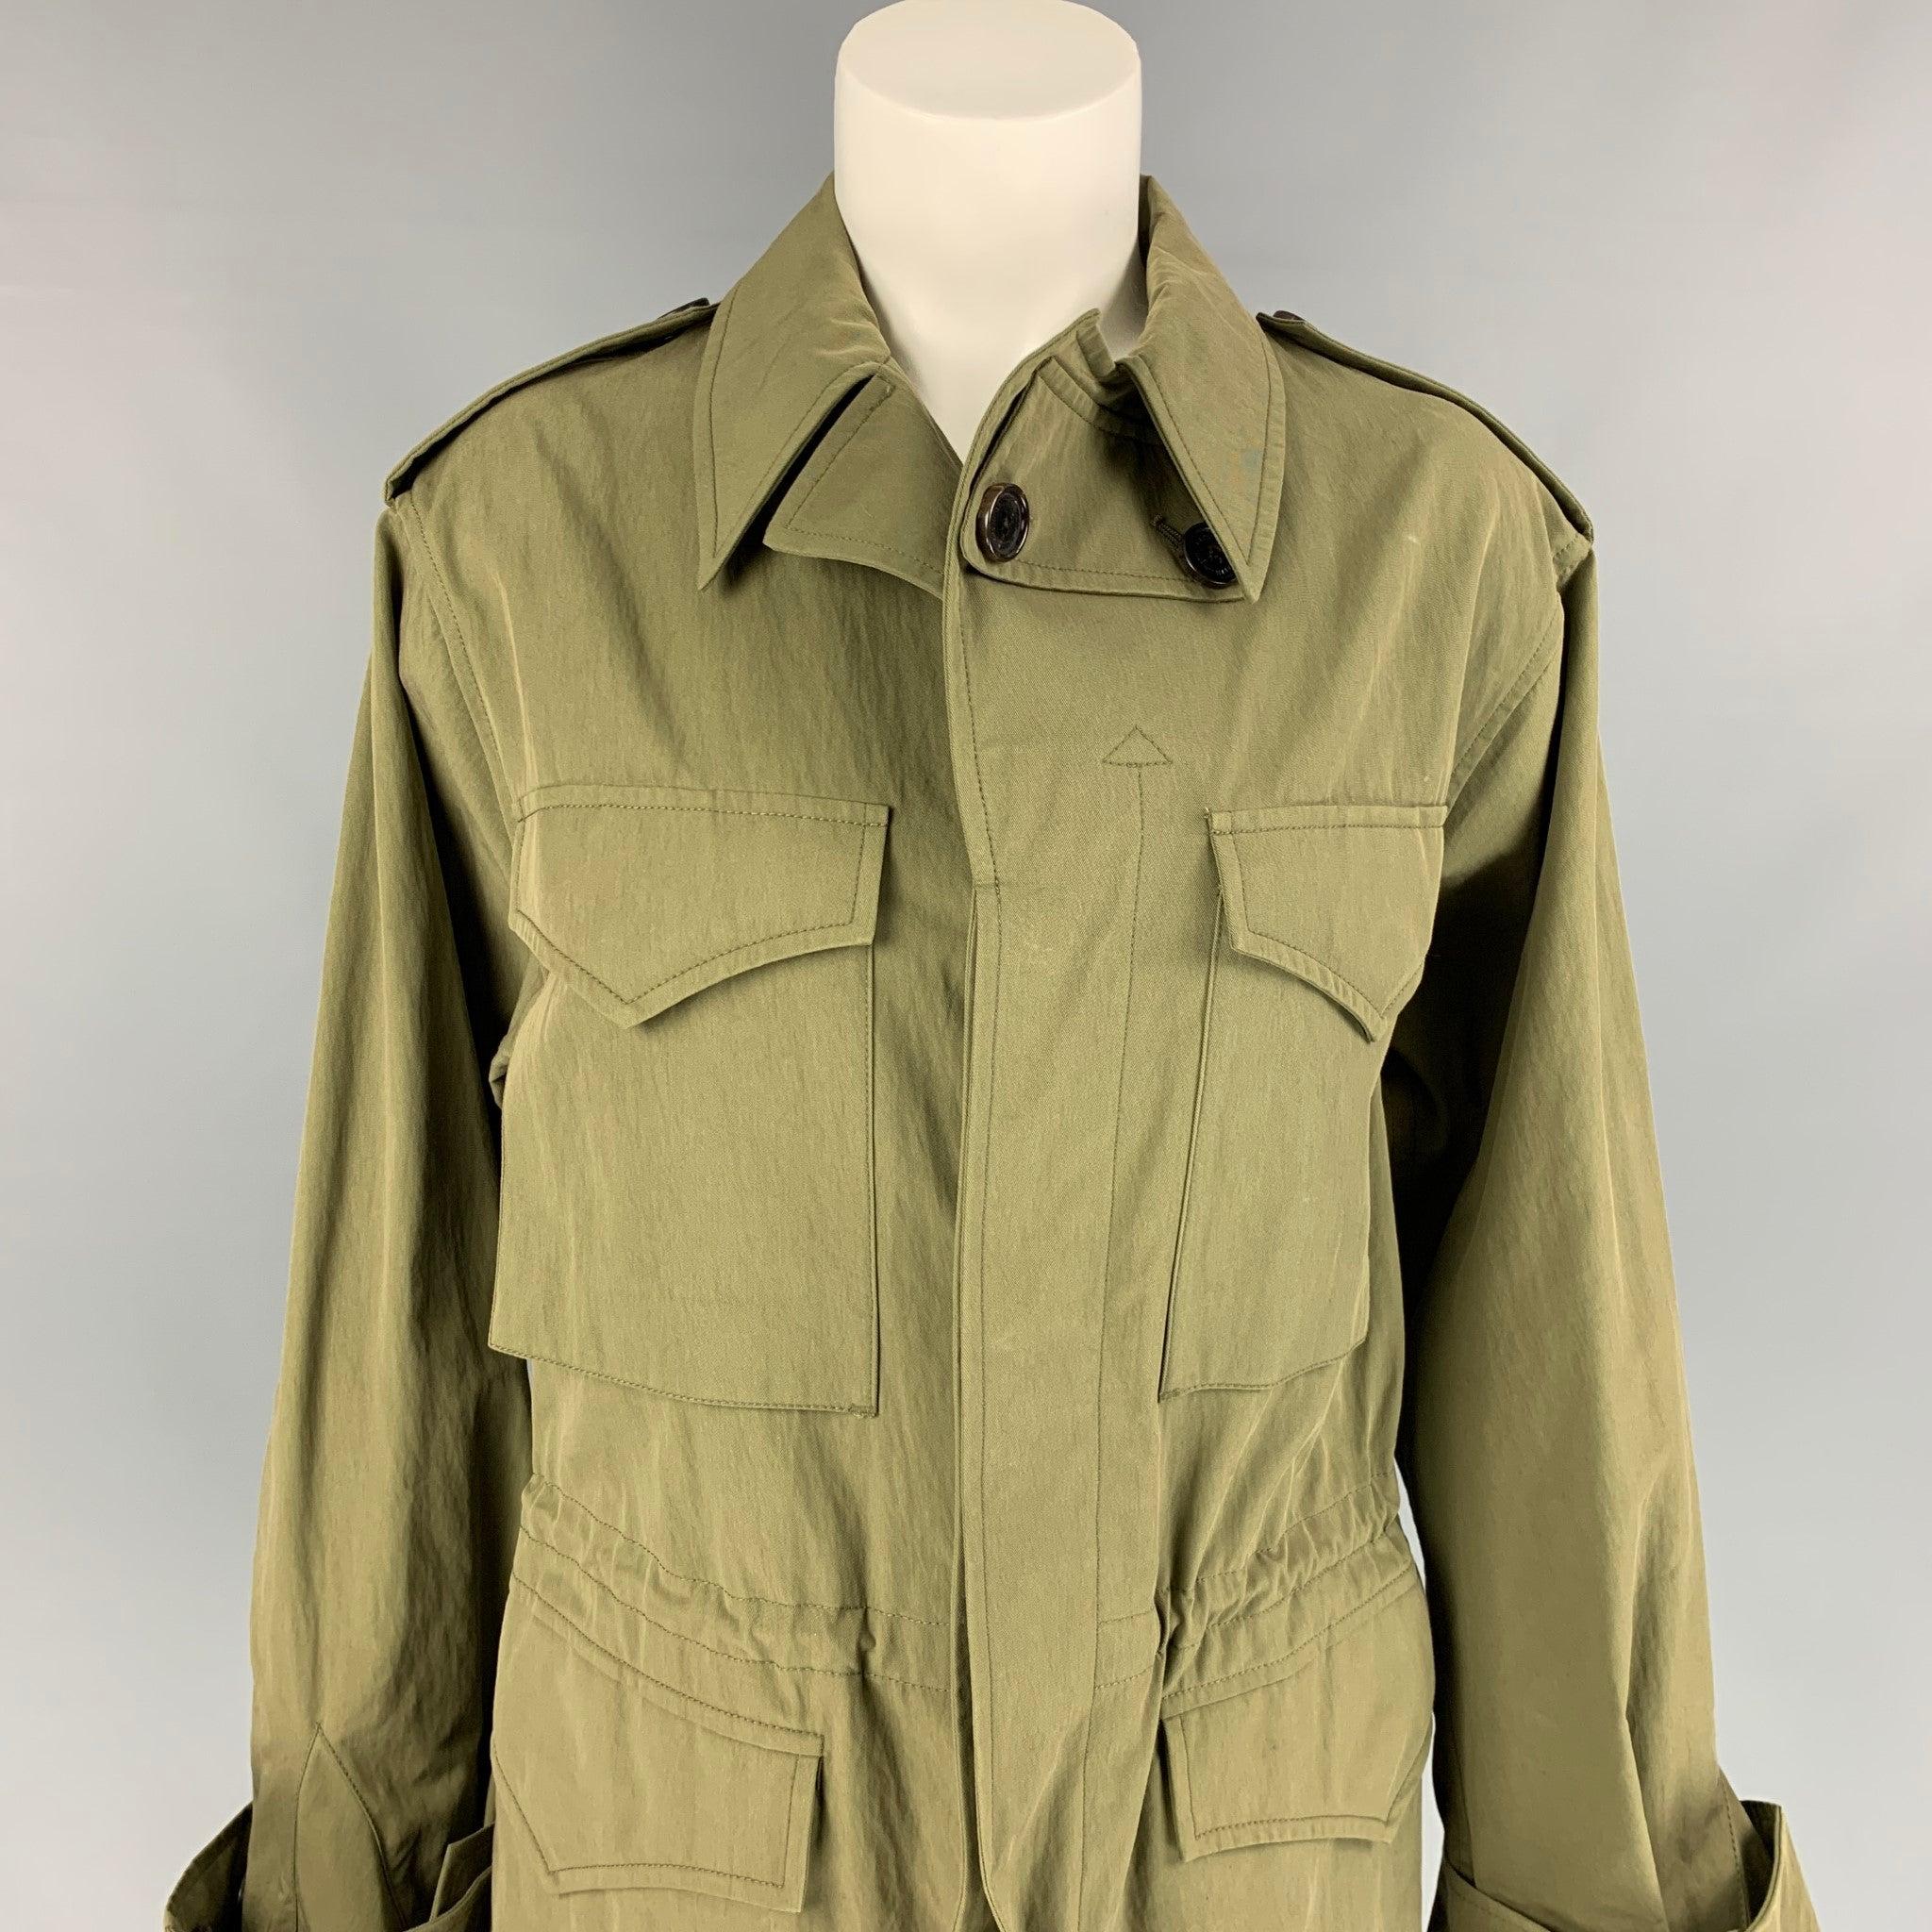 RALPH LAUREN Collection trench coat comes in a olive cotton / nylon featuring a safari style, drawstring details, epaulettes, flap pockets, and a hidden placket closure. Made in Italy.
Excellent
Pre-Owned Condition. 

Marked:  8 

Measurements: 
